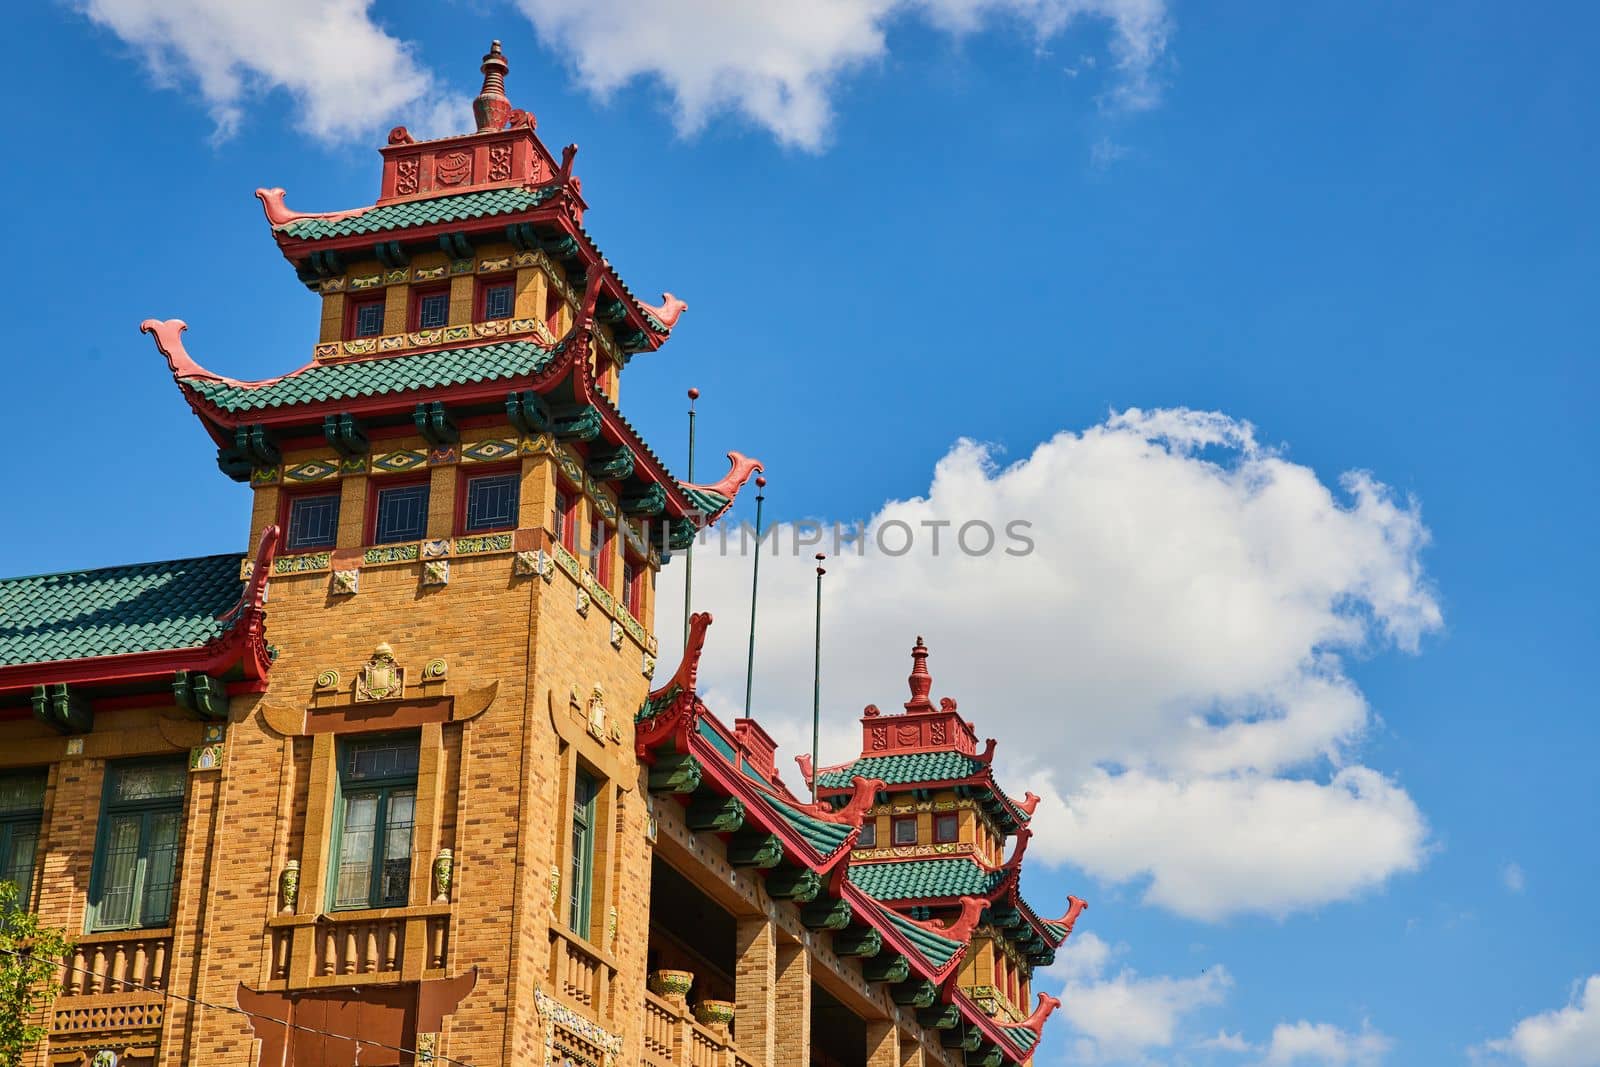 Image of Chicago Chinatown architecture exterior of Asian style buildings